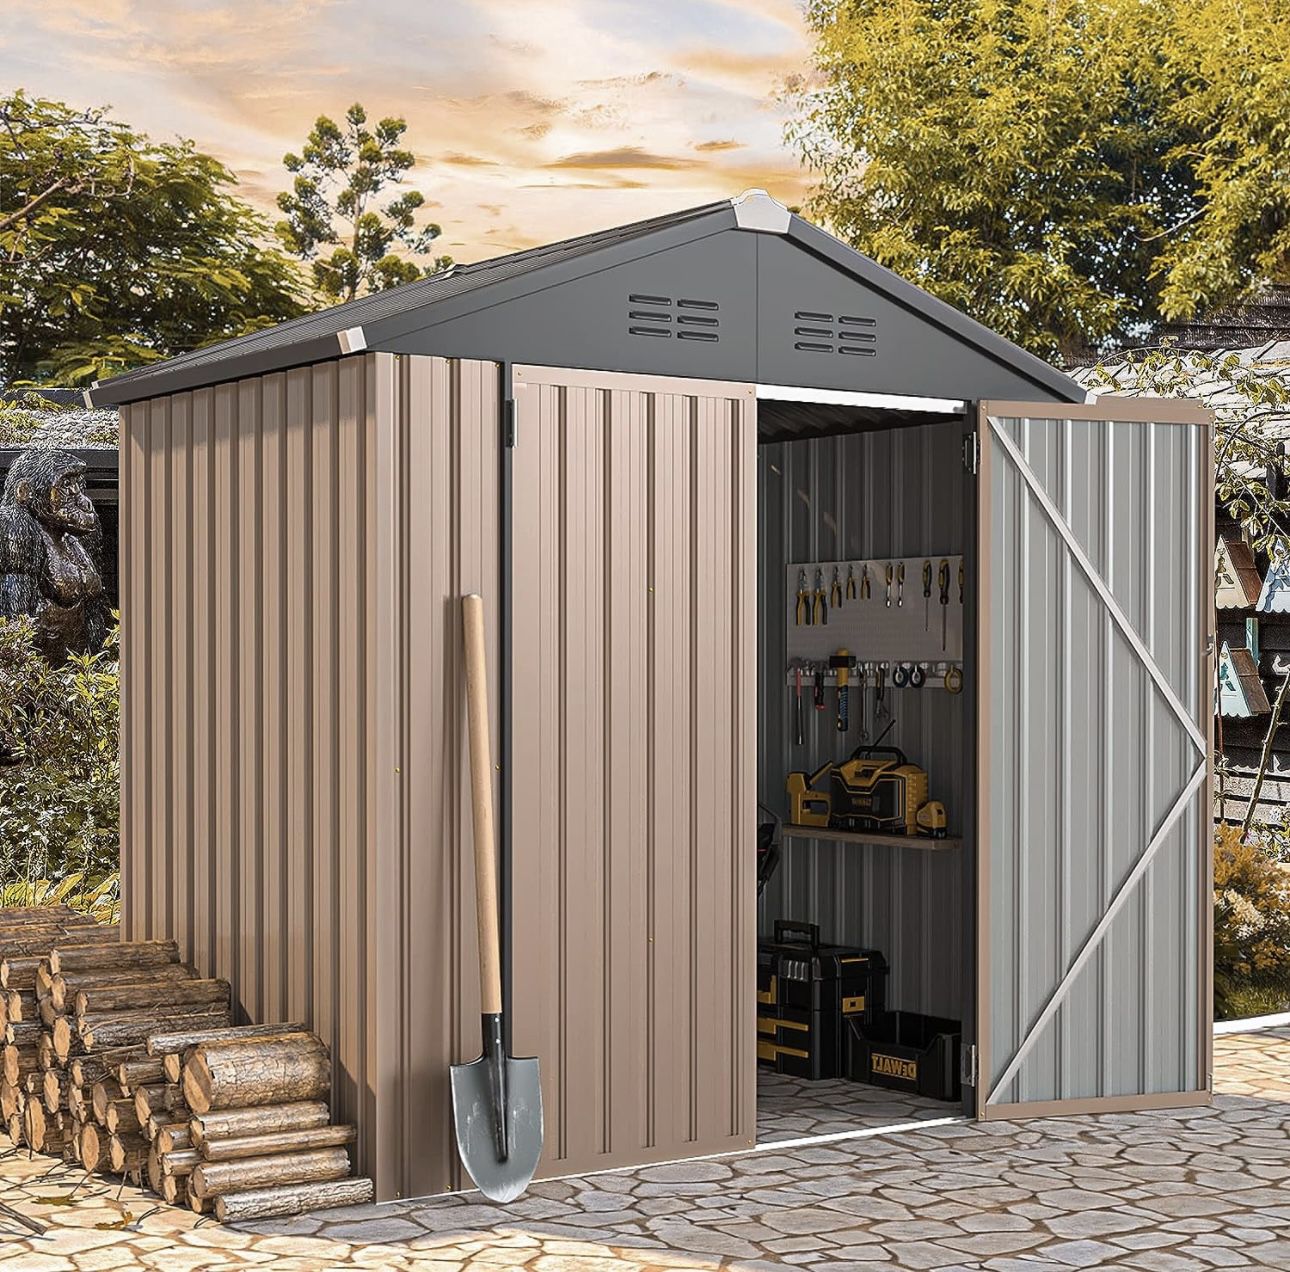 6' x 4' Storage Shed, Metal Sheds & Outdoor Storage Clearance, Utility and Tool Garden Shed w/Lock